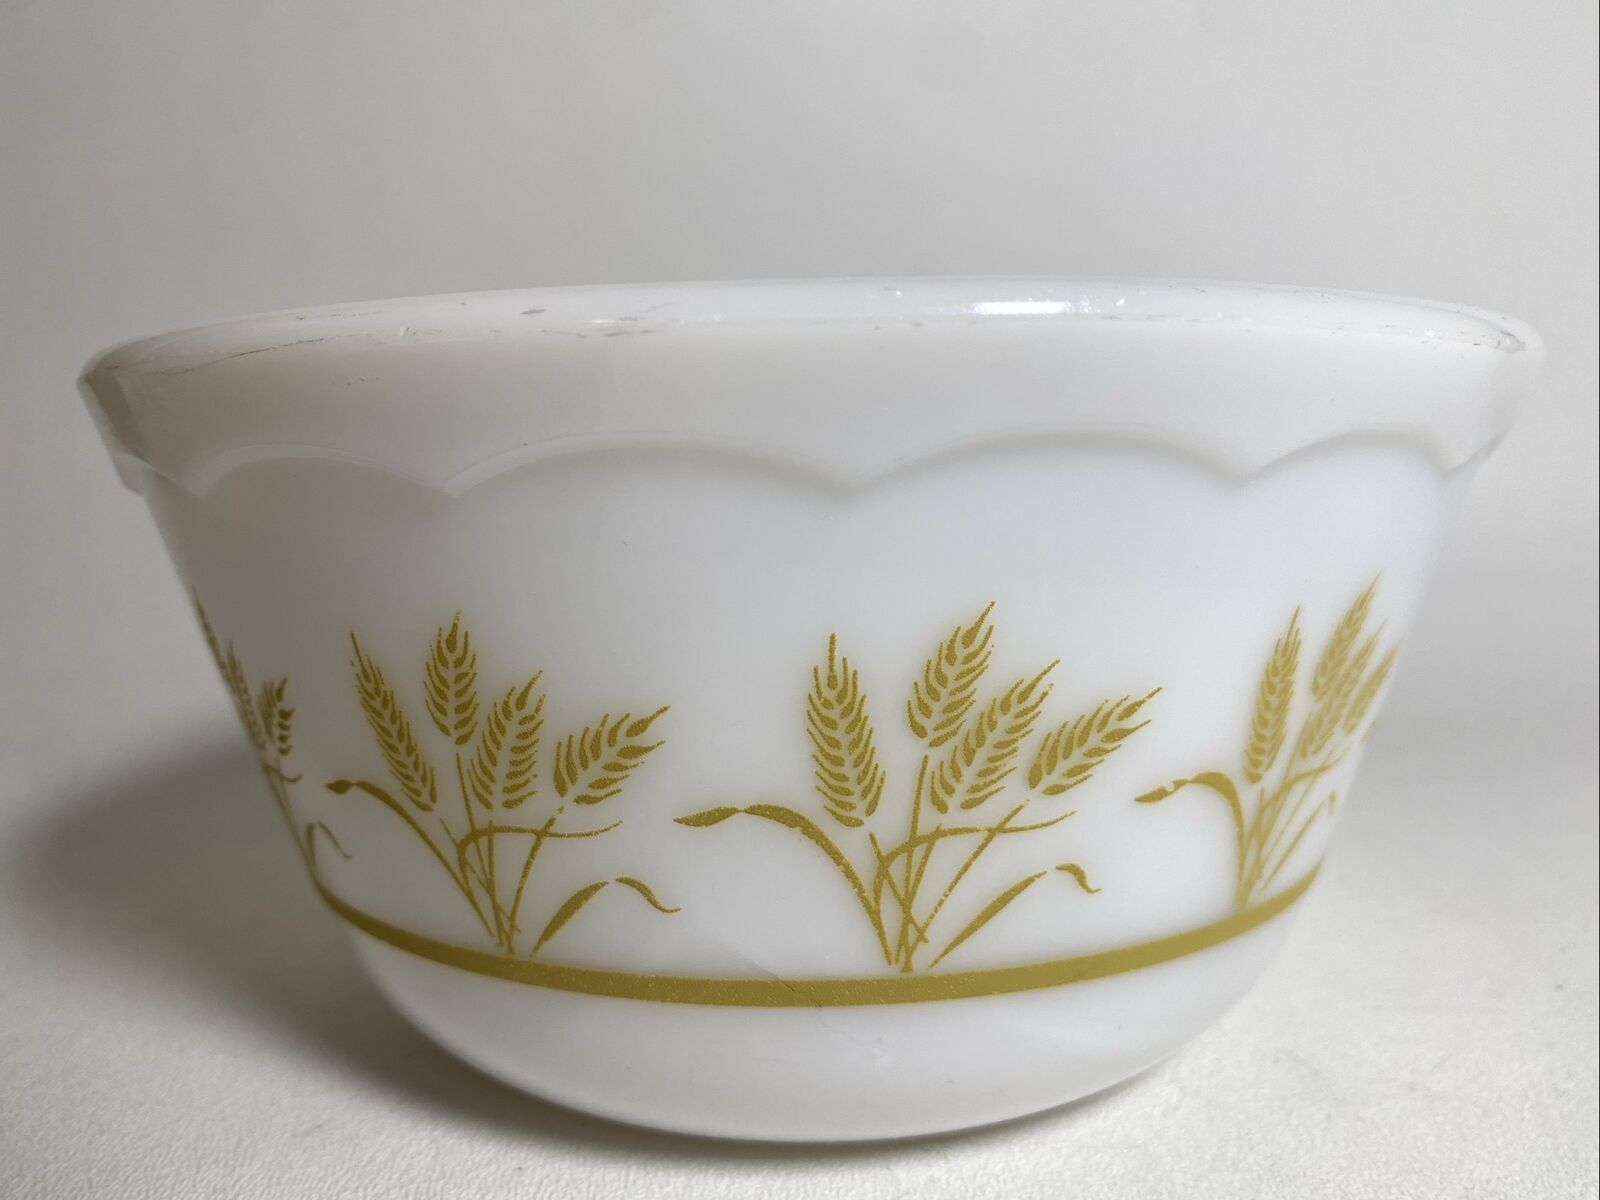 Unmarked Hazel Atlas Golden Wheat Small Mixing Bowl 7x3.5 inches Milk Glass